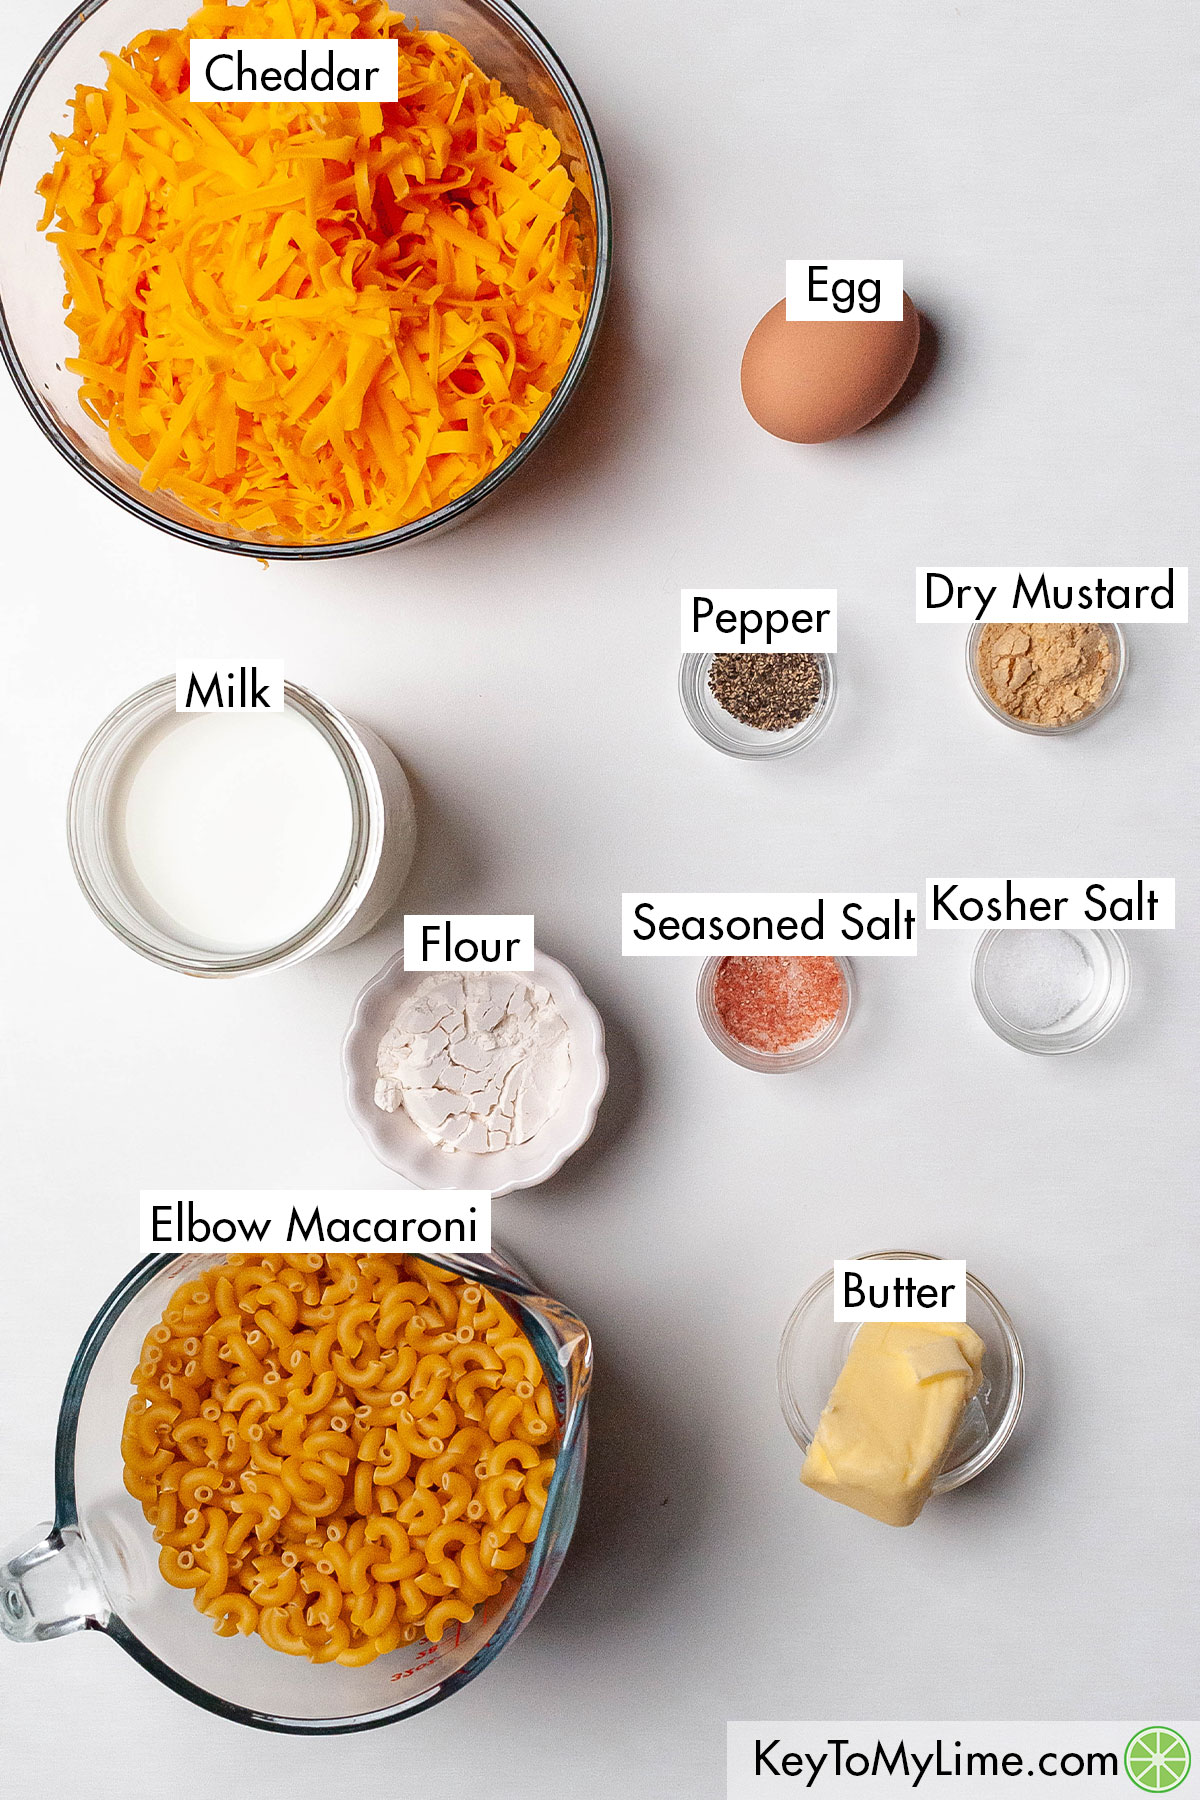 The labeled ingredients for pioneer woman mac and cheese.